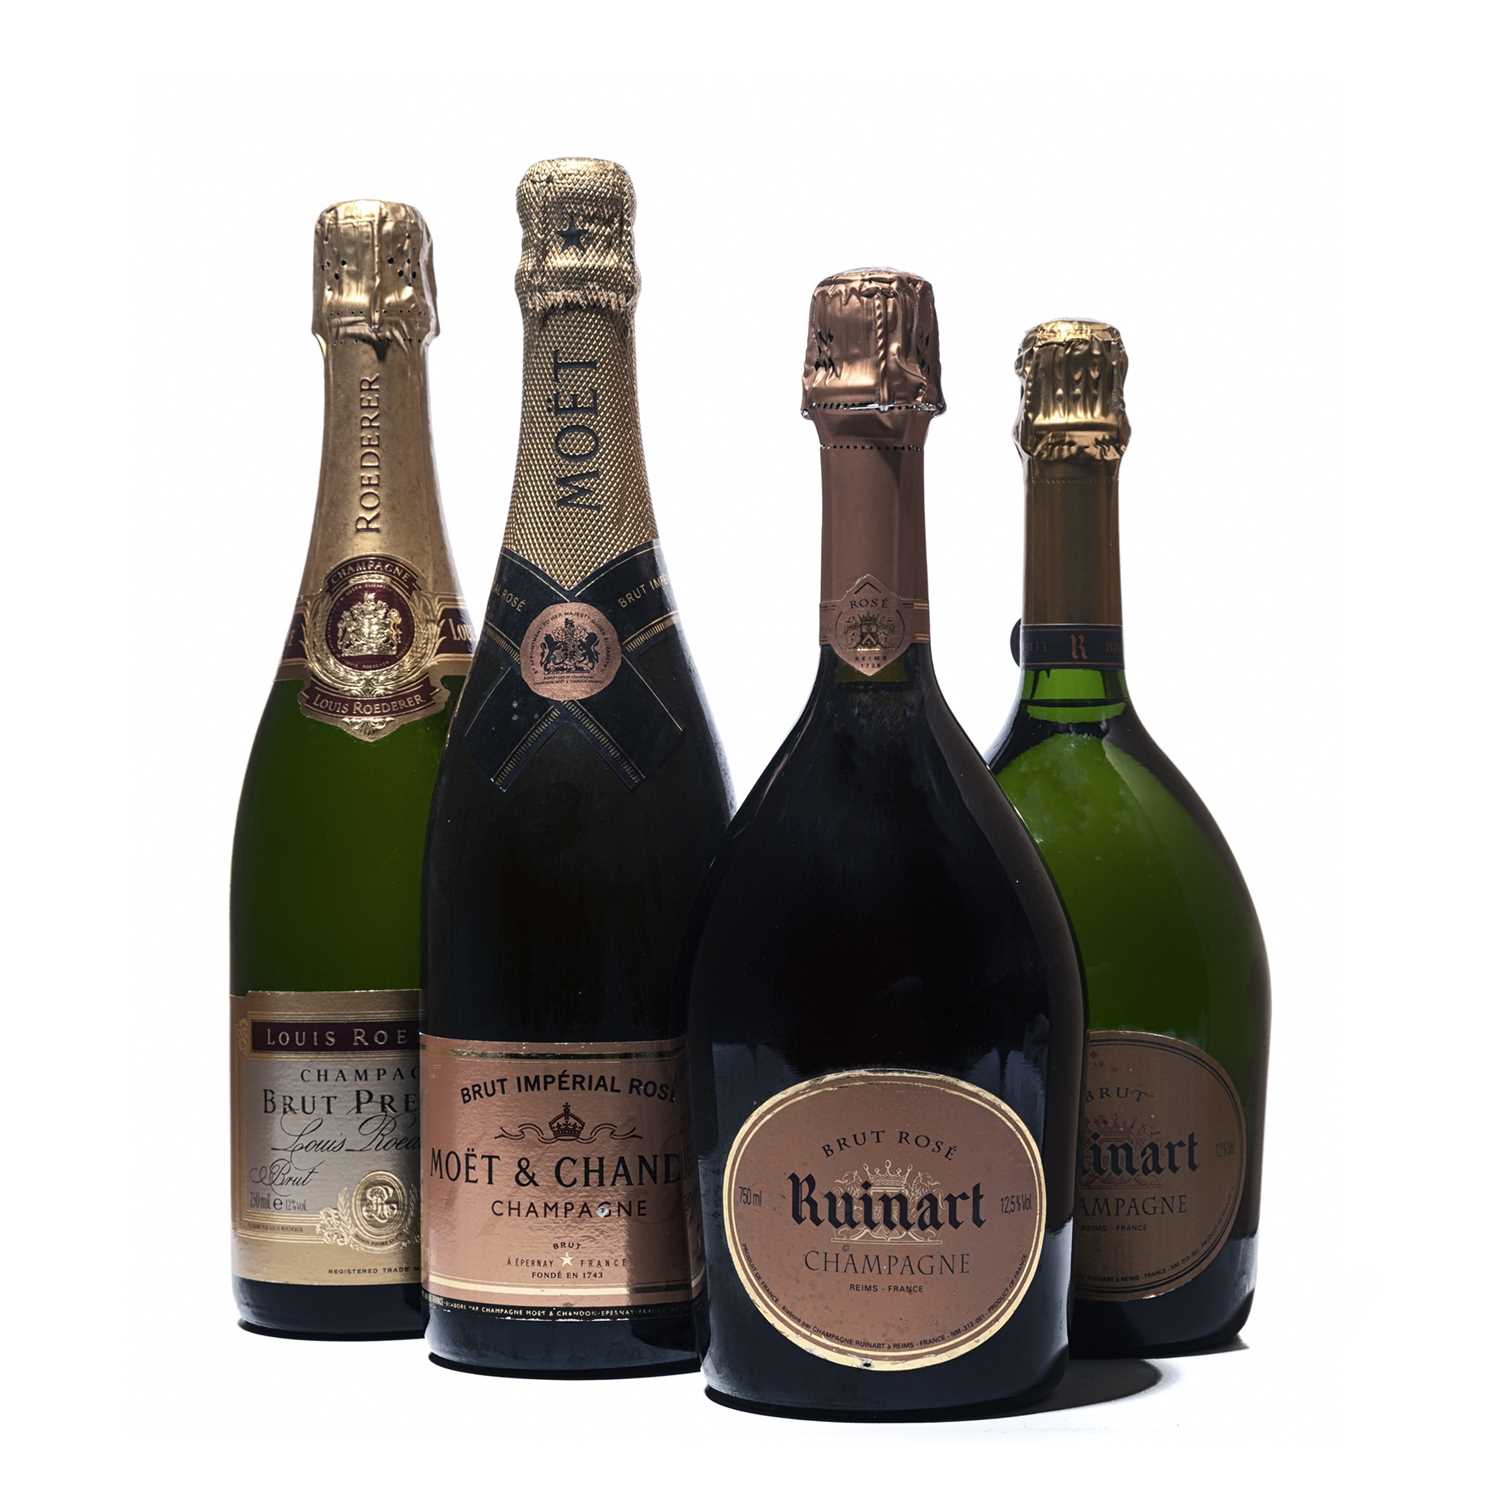 Lot 108 - 4 bottles Mixed Champagne